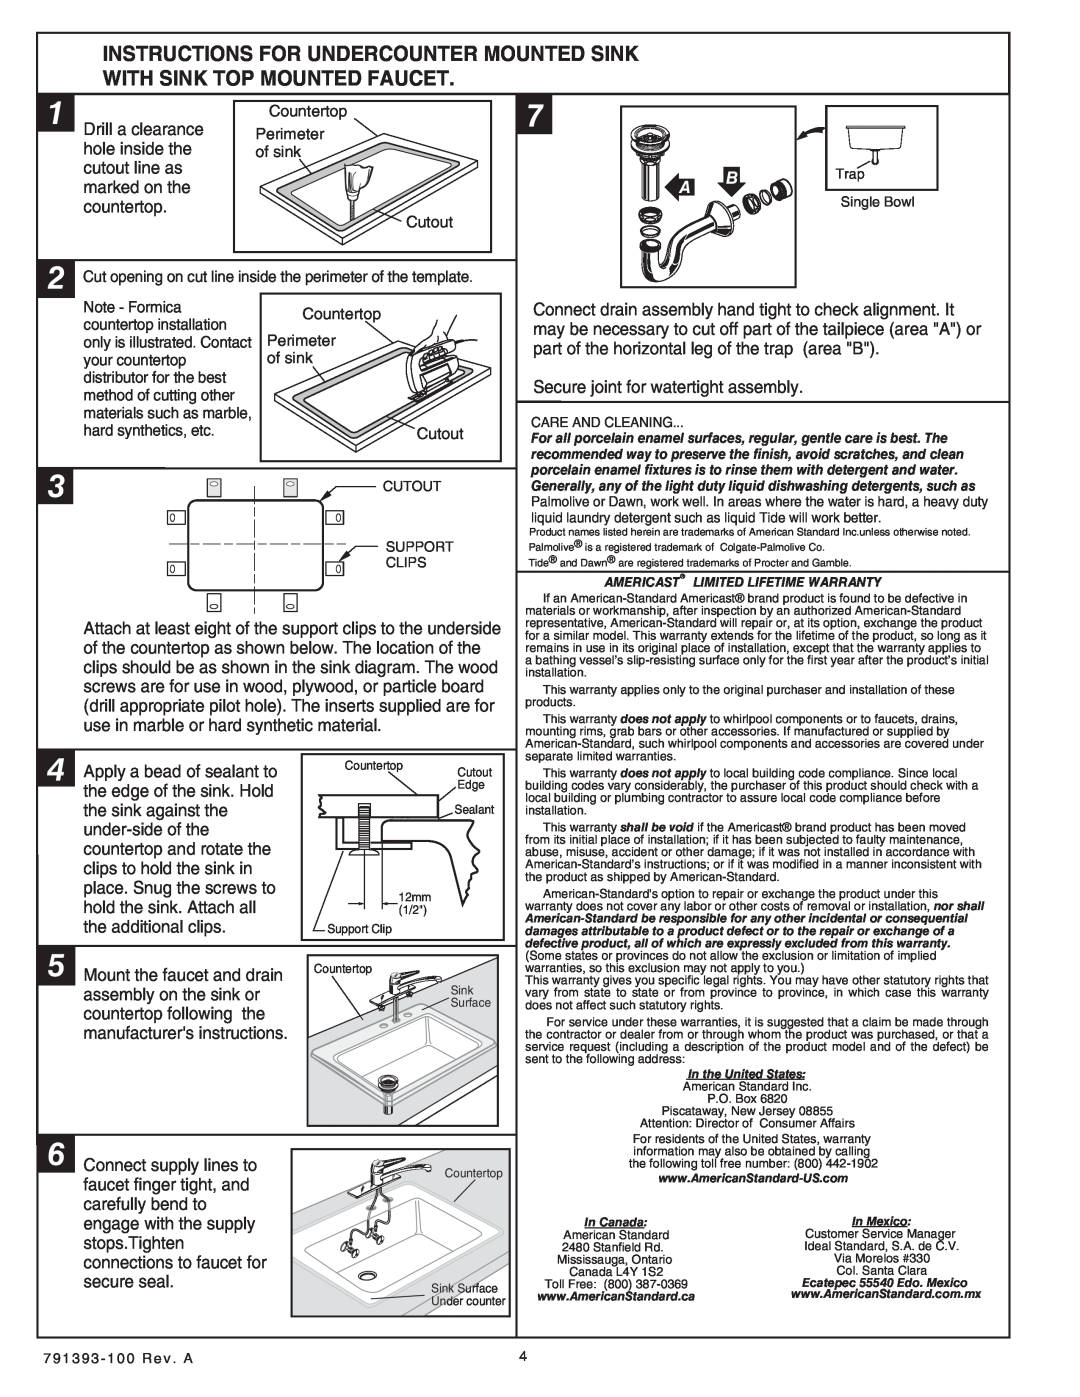 American Standard SERIES 7193 installation instructions Drill a clearance 